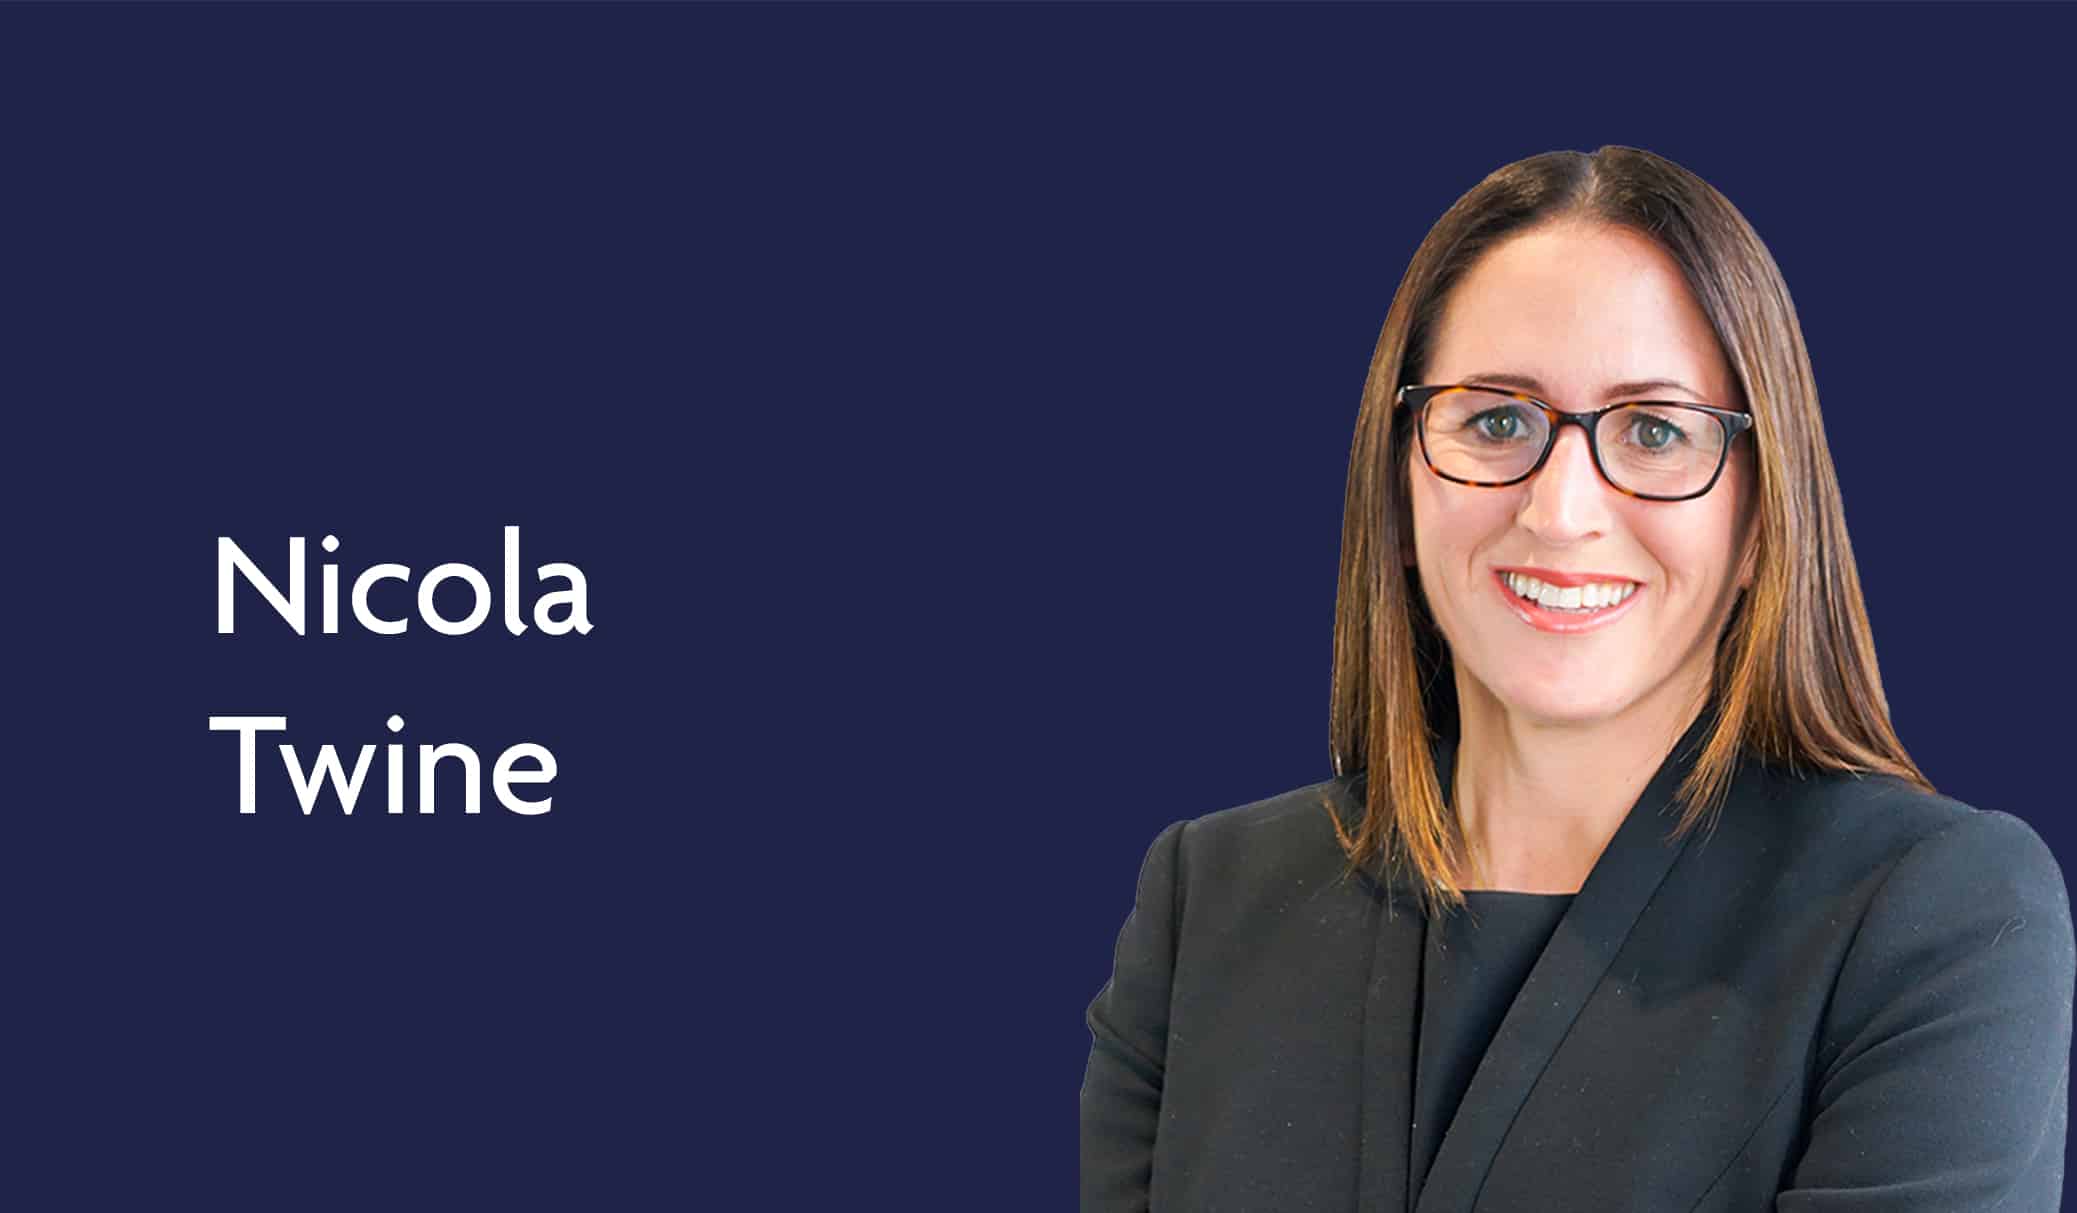 Nicola Twine reflects on securing a finding of Fundamental Dishonesty with Enforceable Costs